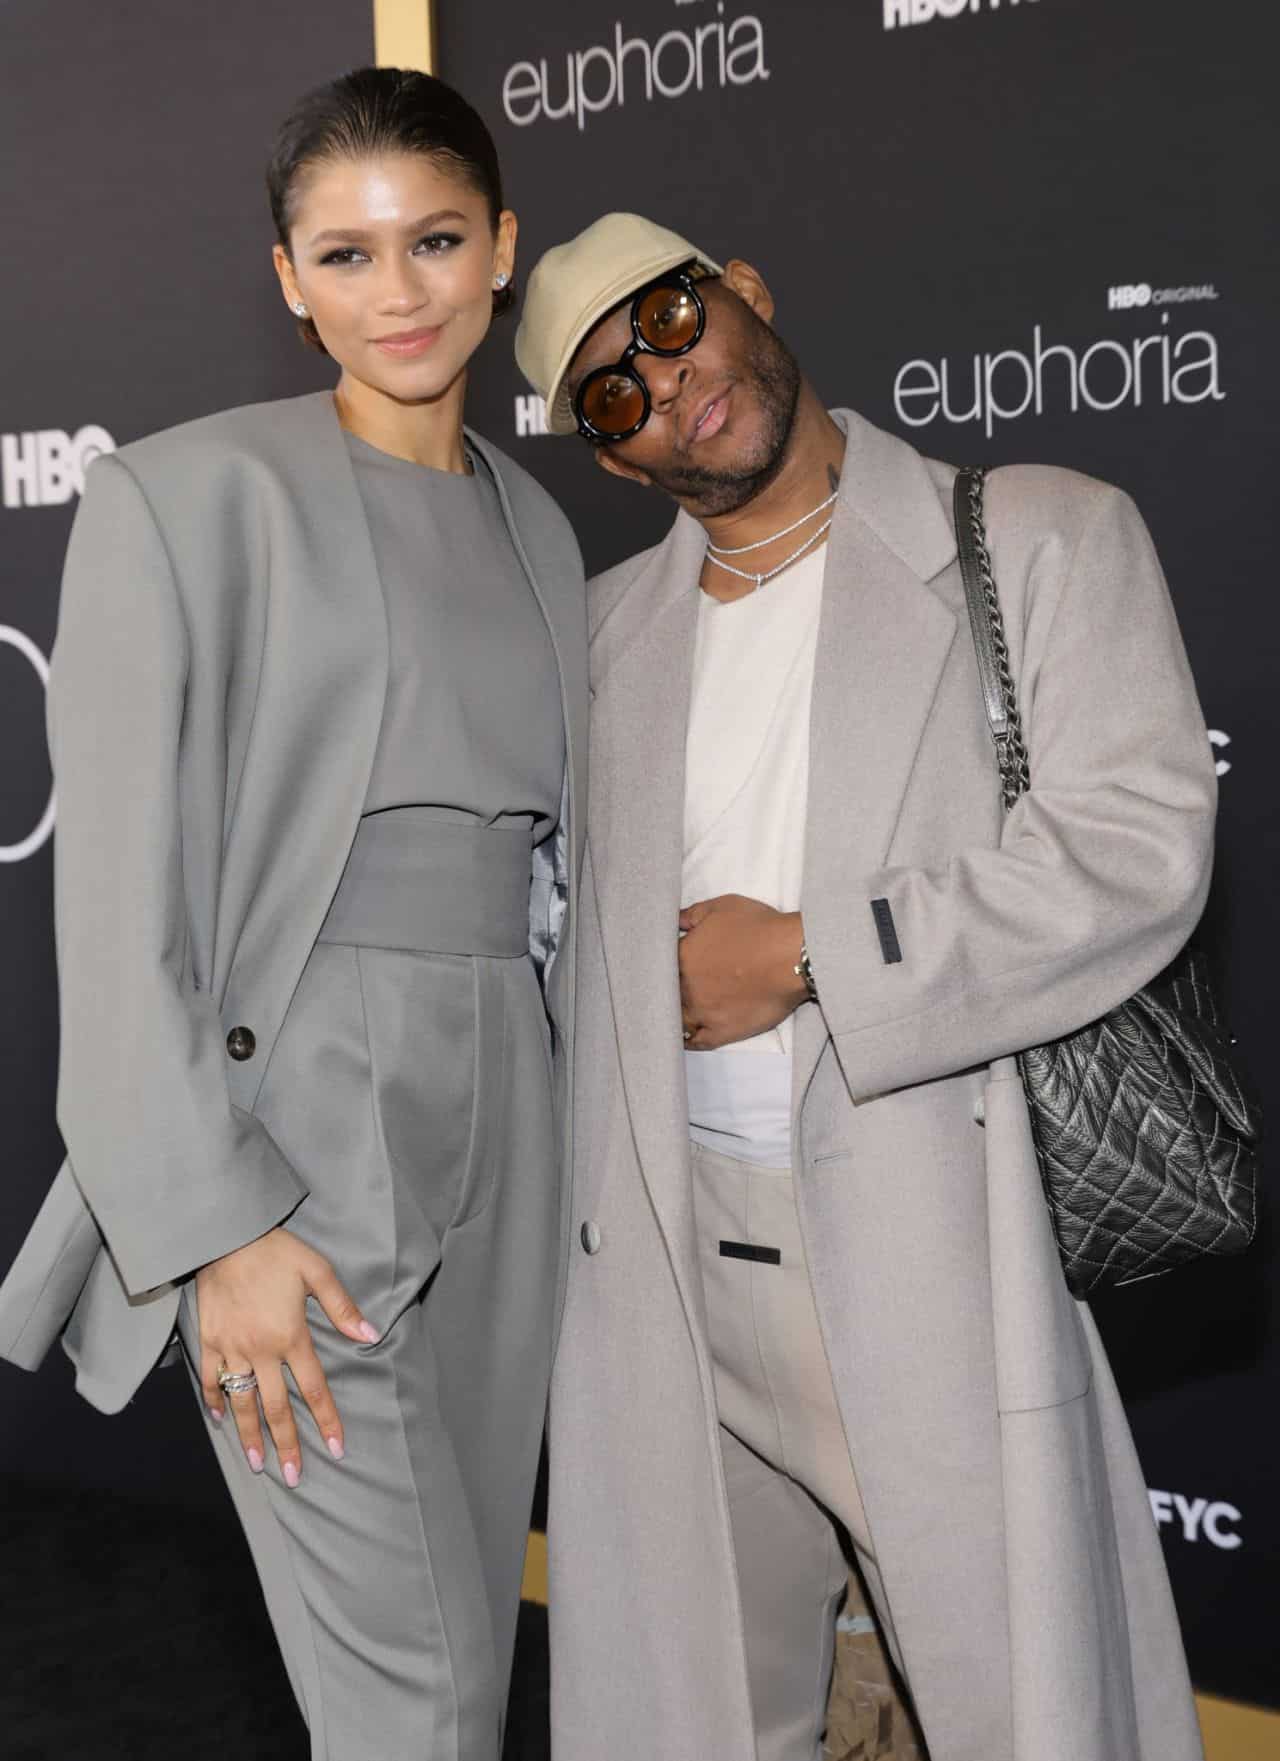 Zendaya Looked Stylish in a Gray Pantsuit at HBO Max "Euphoria" FYC Event in LA